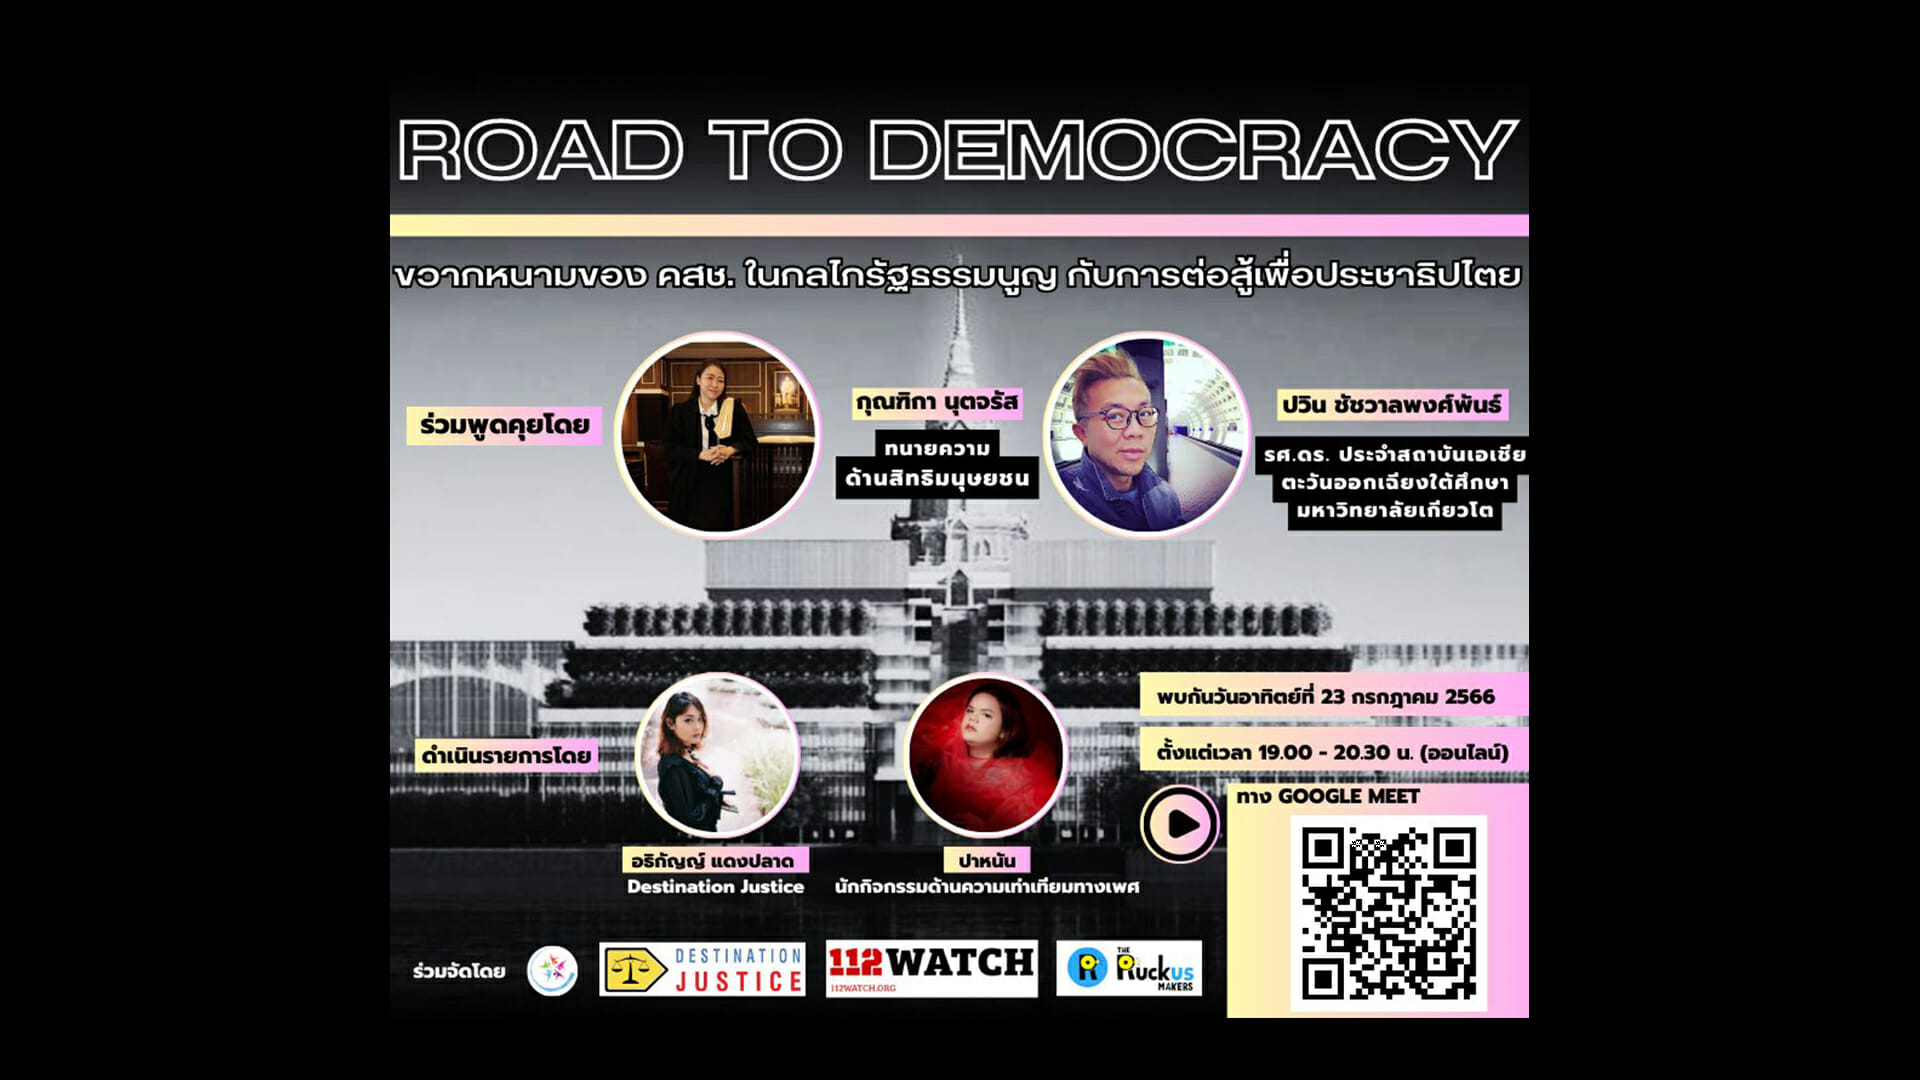 112Watch Road to Democracy